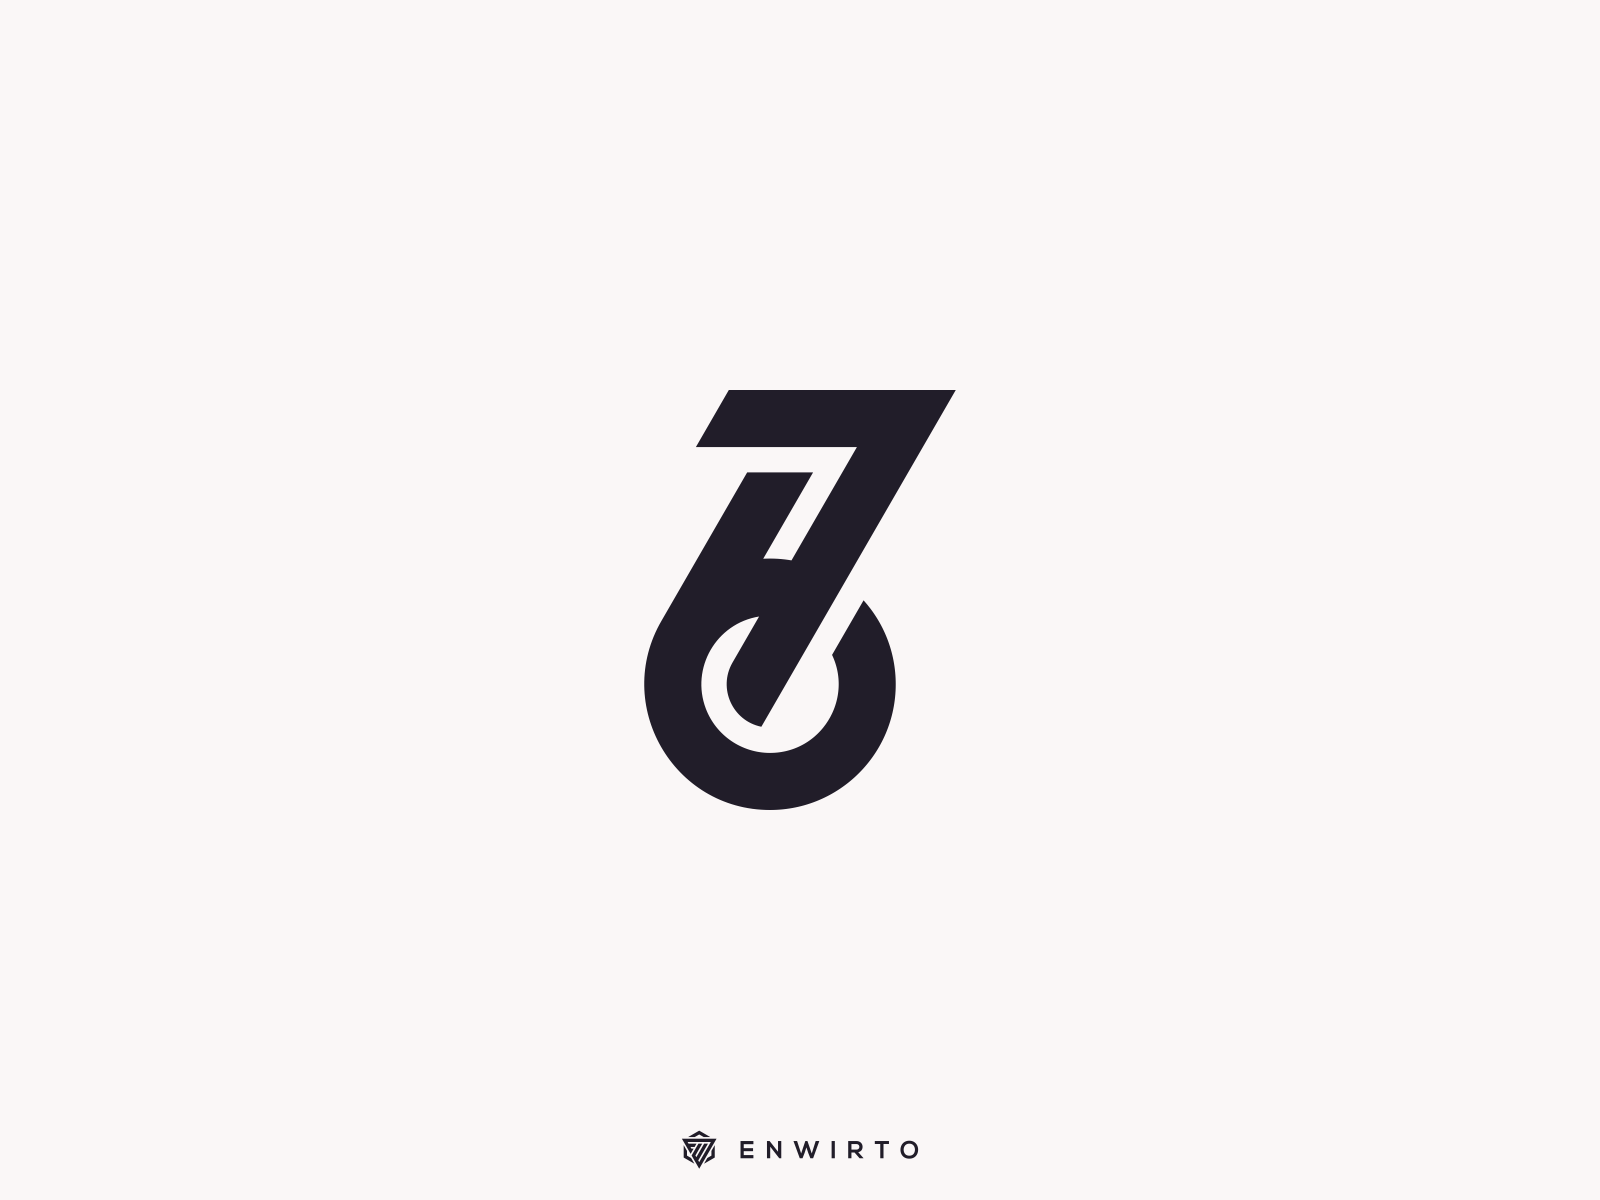 76 or 7H6 Concept Logo by Enwirto on Dribbble